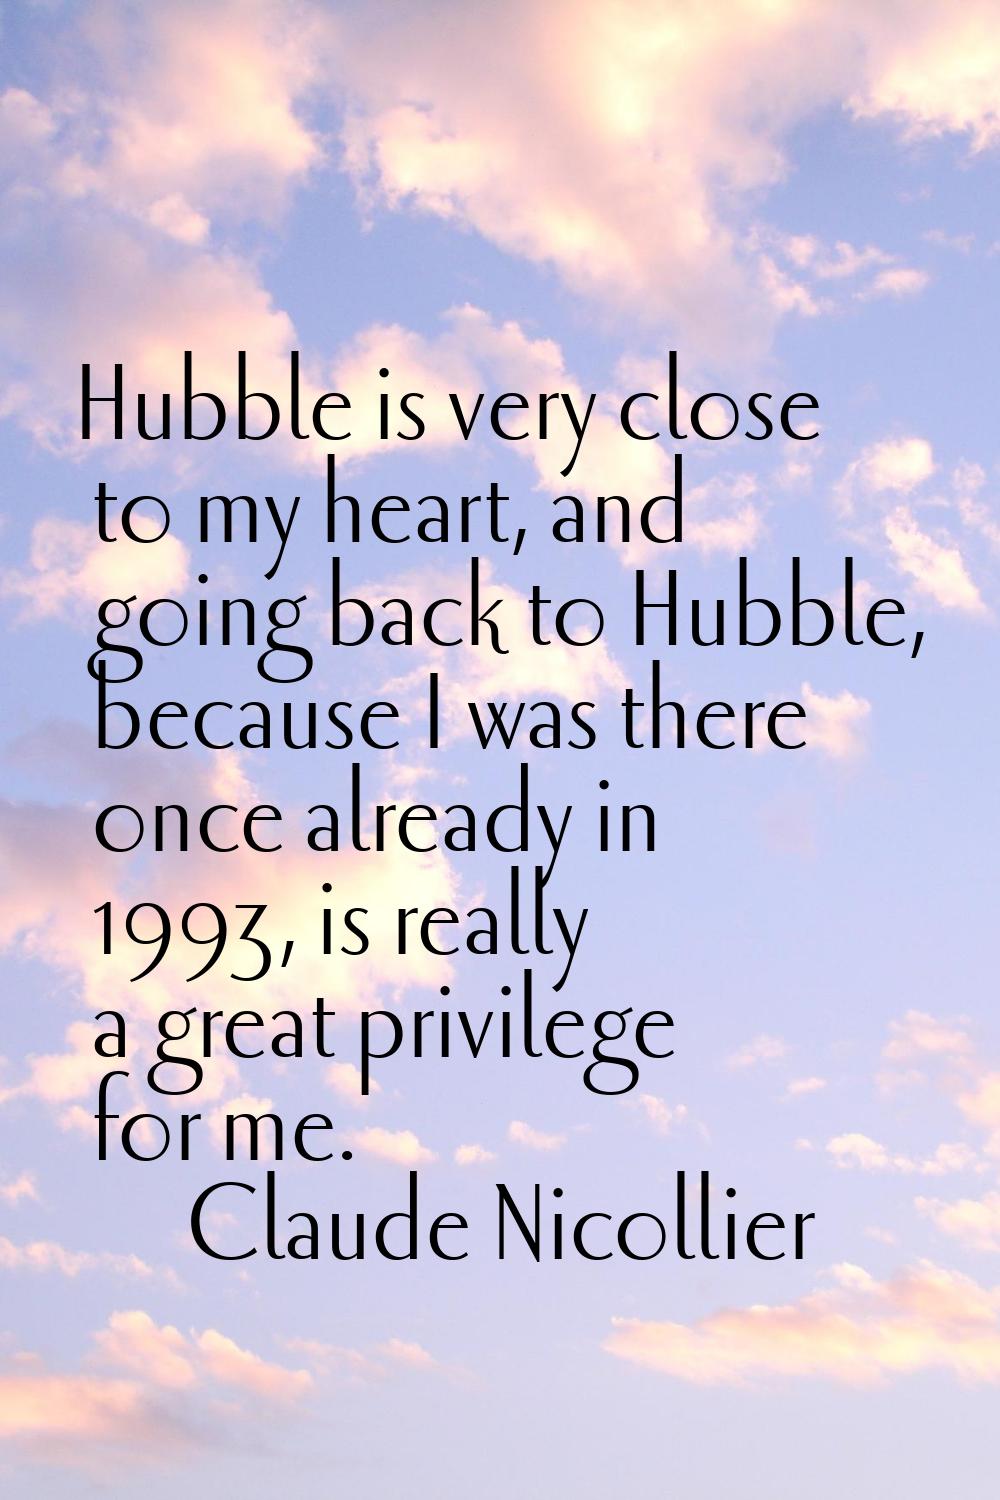 Hubble is very close to my heart, and going back to Hubble, because I was there once already in 199